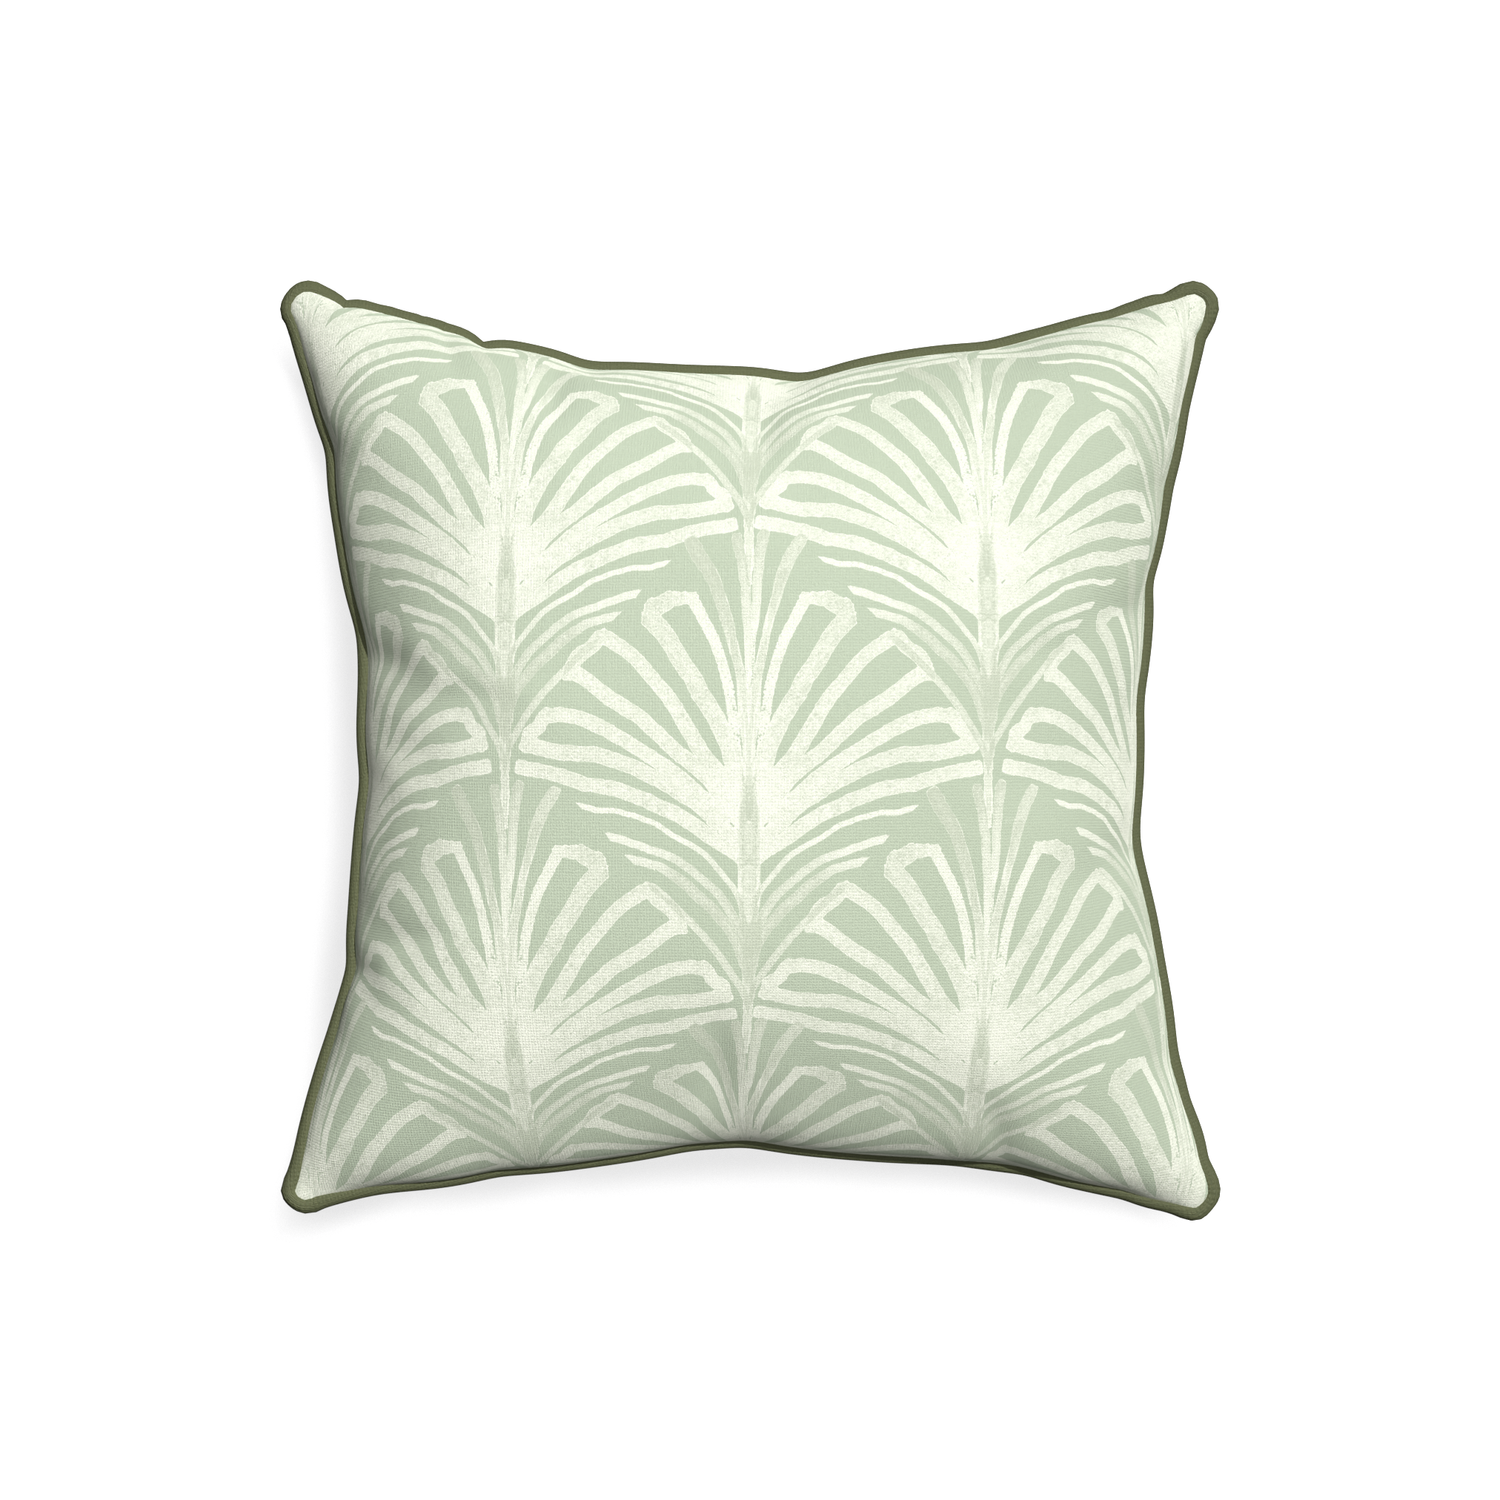 20-square suzy sage custom sage green palmpillow with f piping on white background